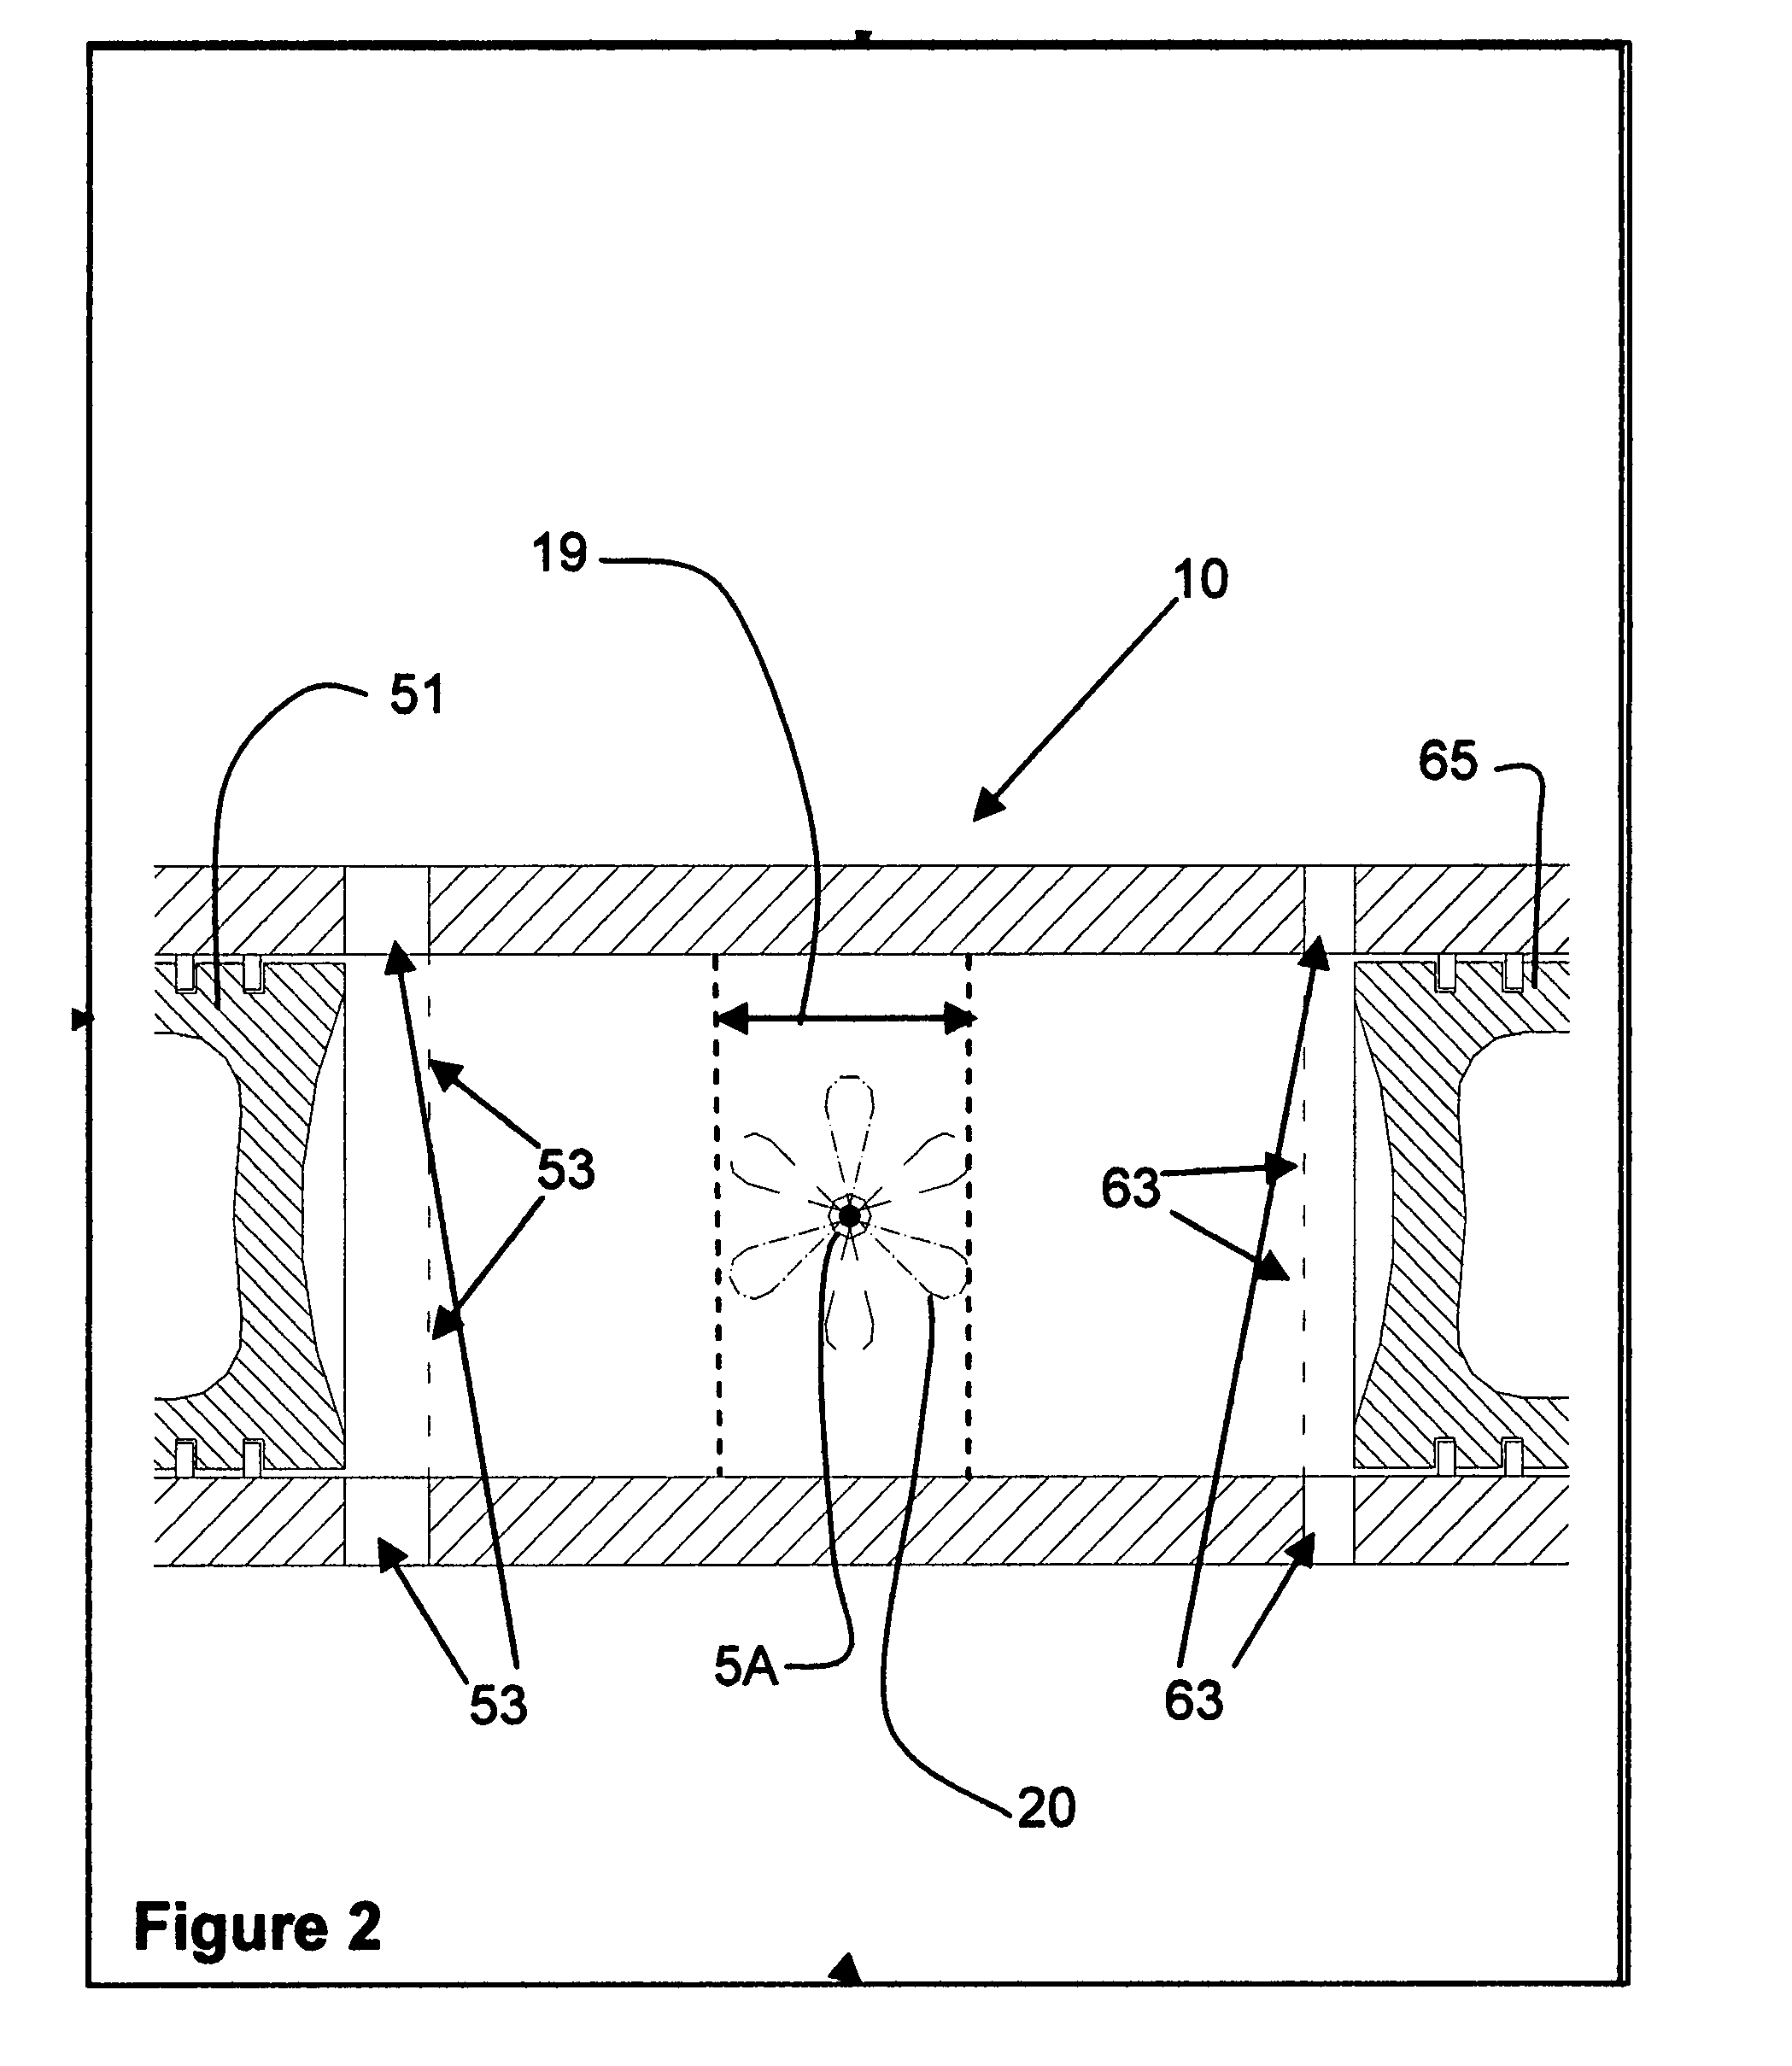 Spark ignition and fuel injector system for an internal combustion engine